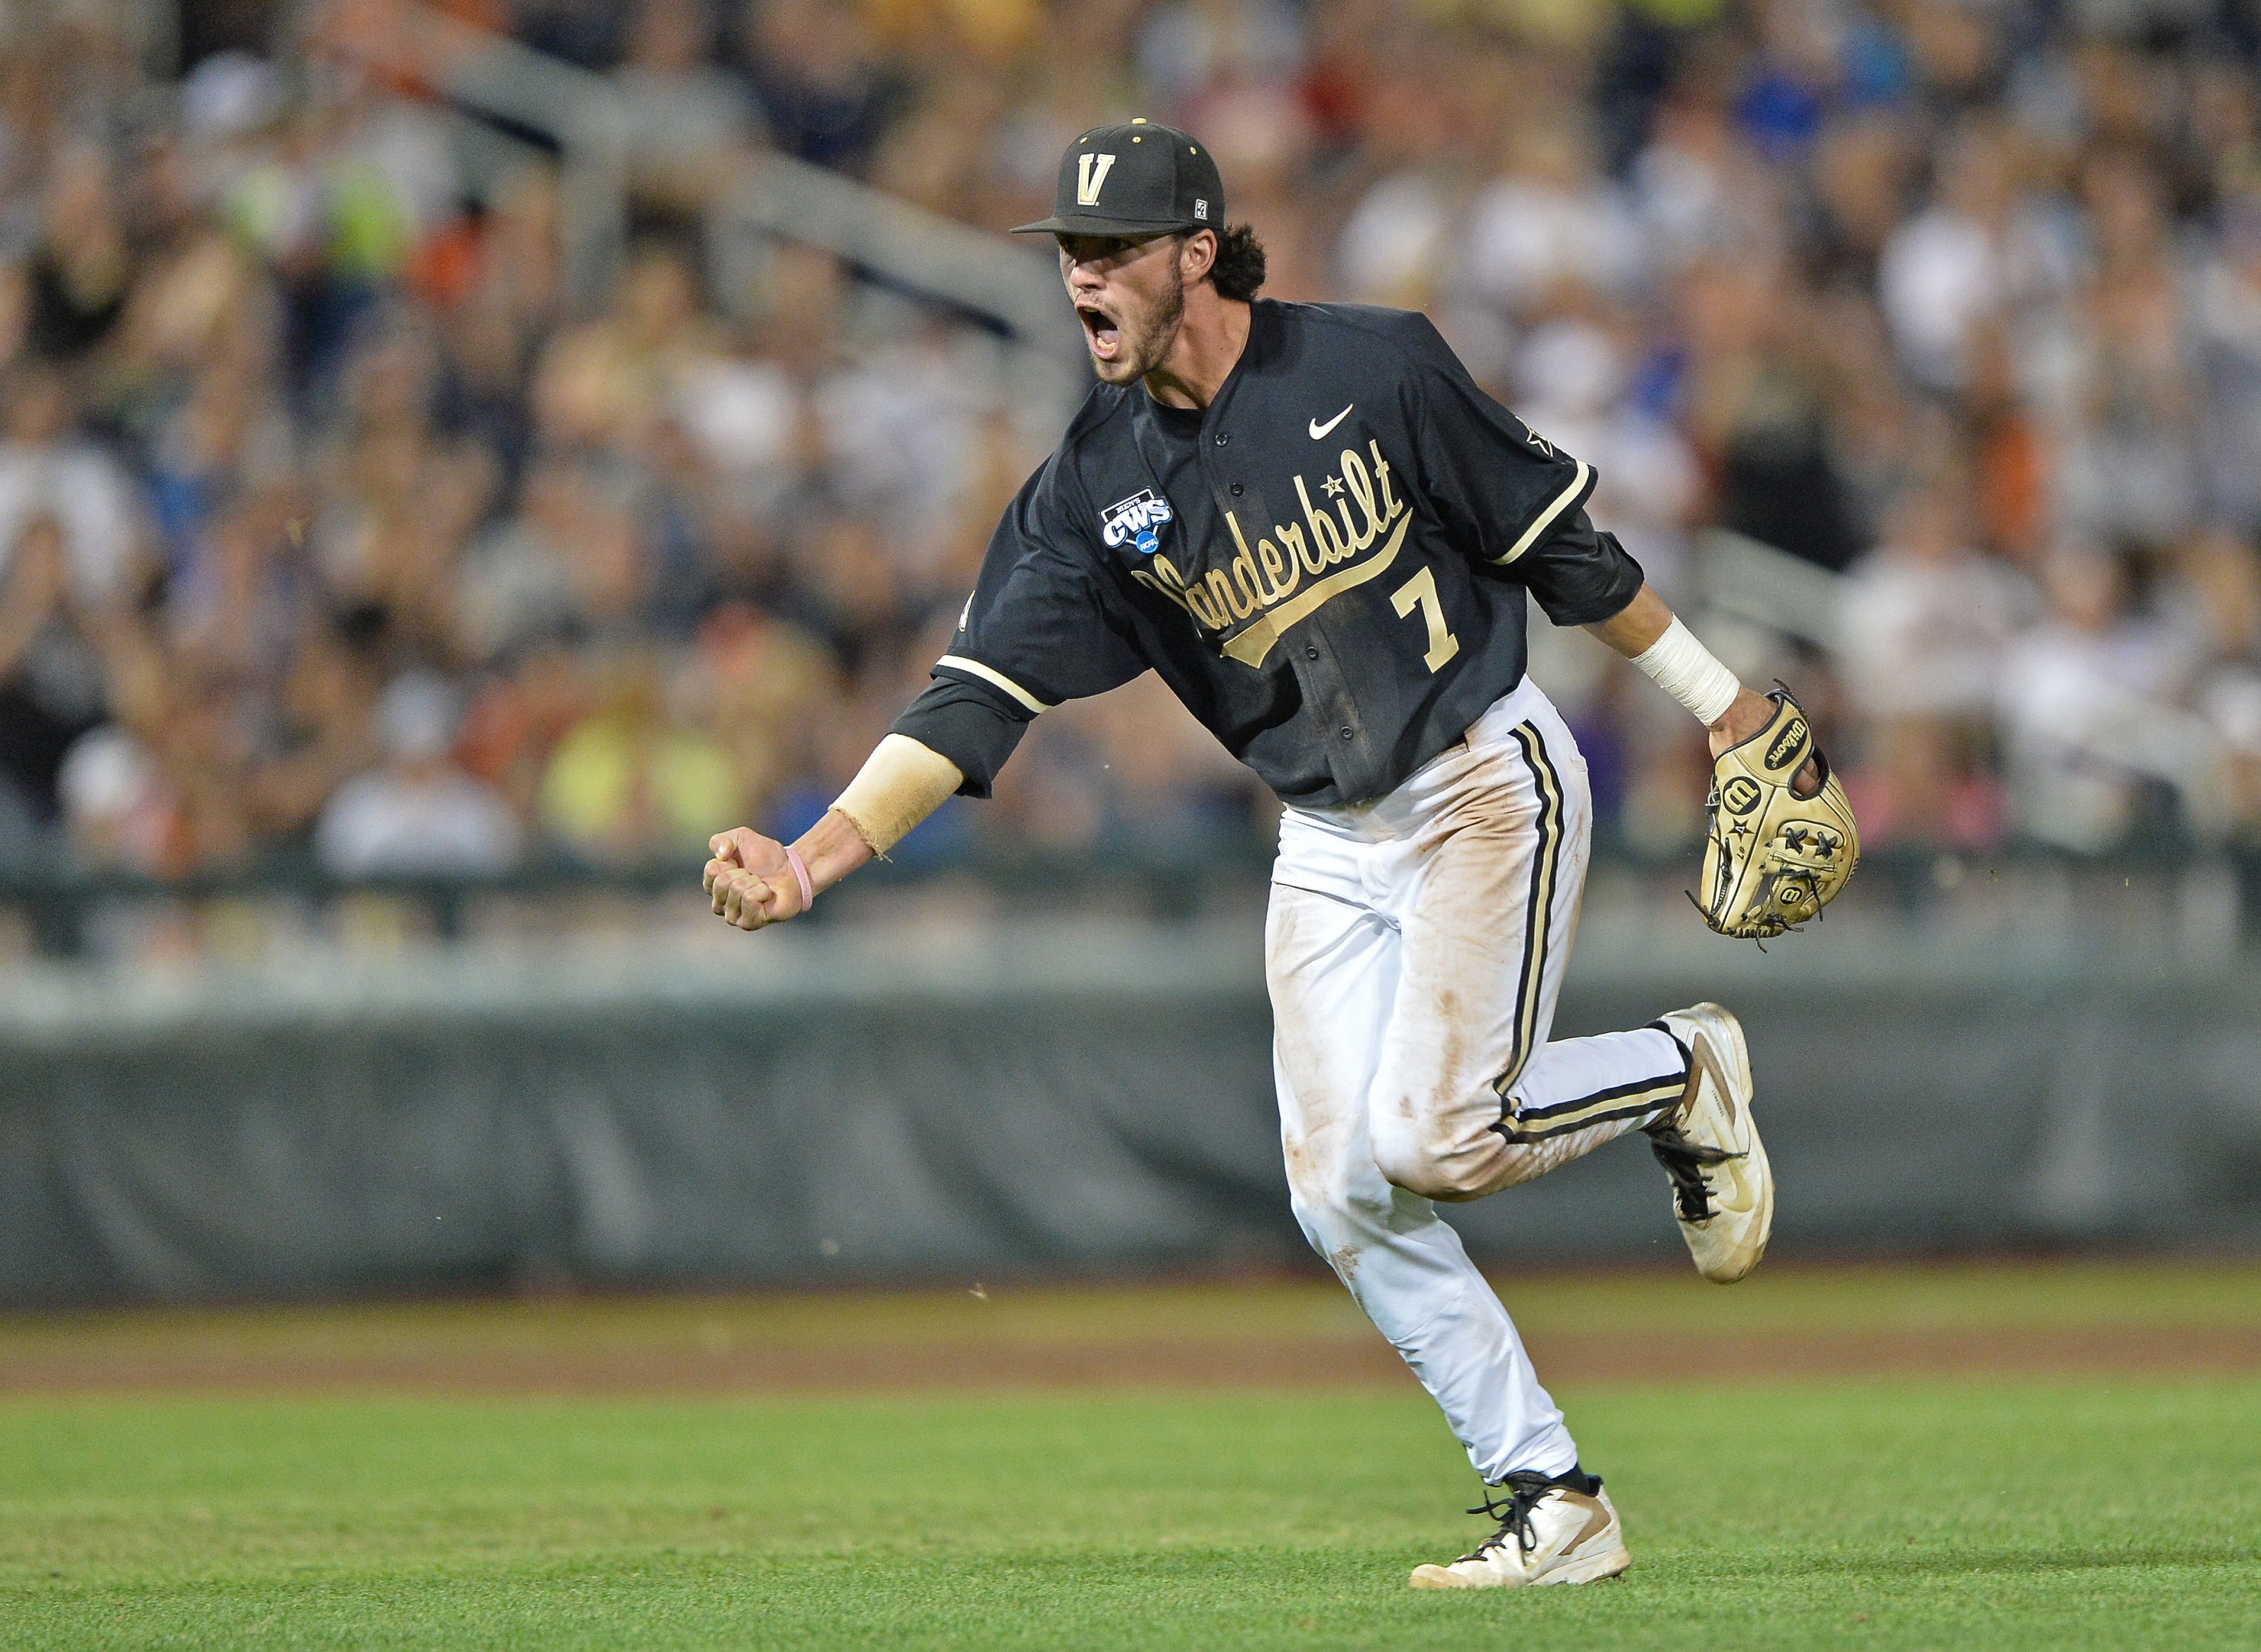 Vanderbilt Baseball: Dansby Swanson's top moments with the Commodores